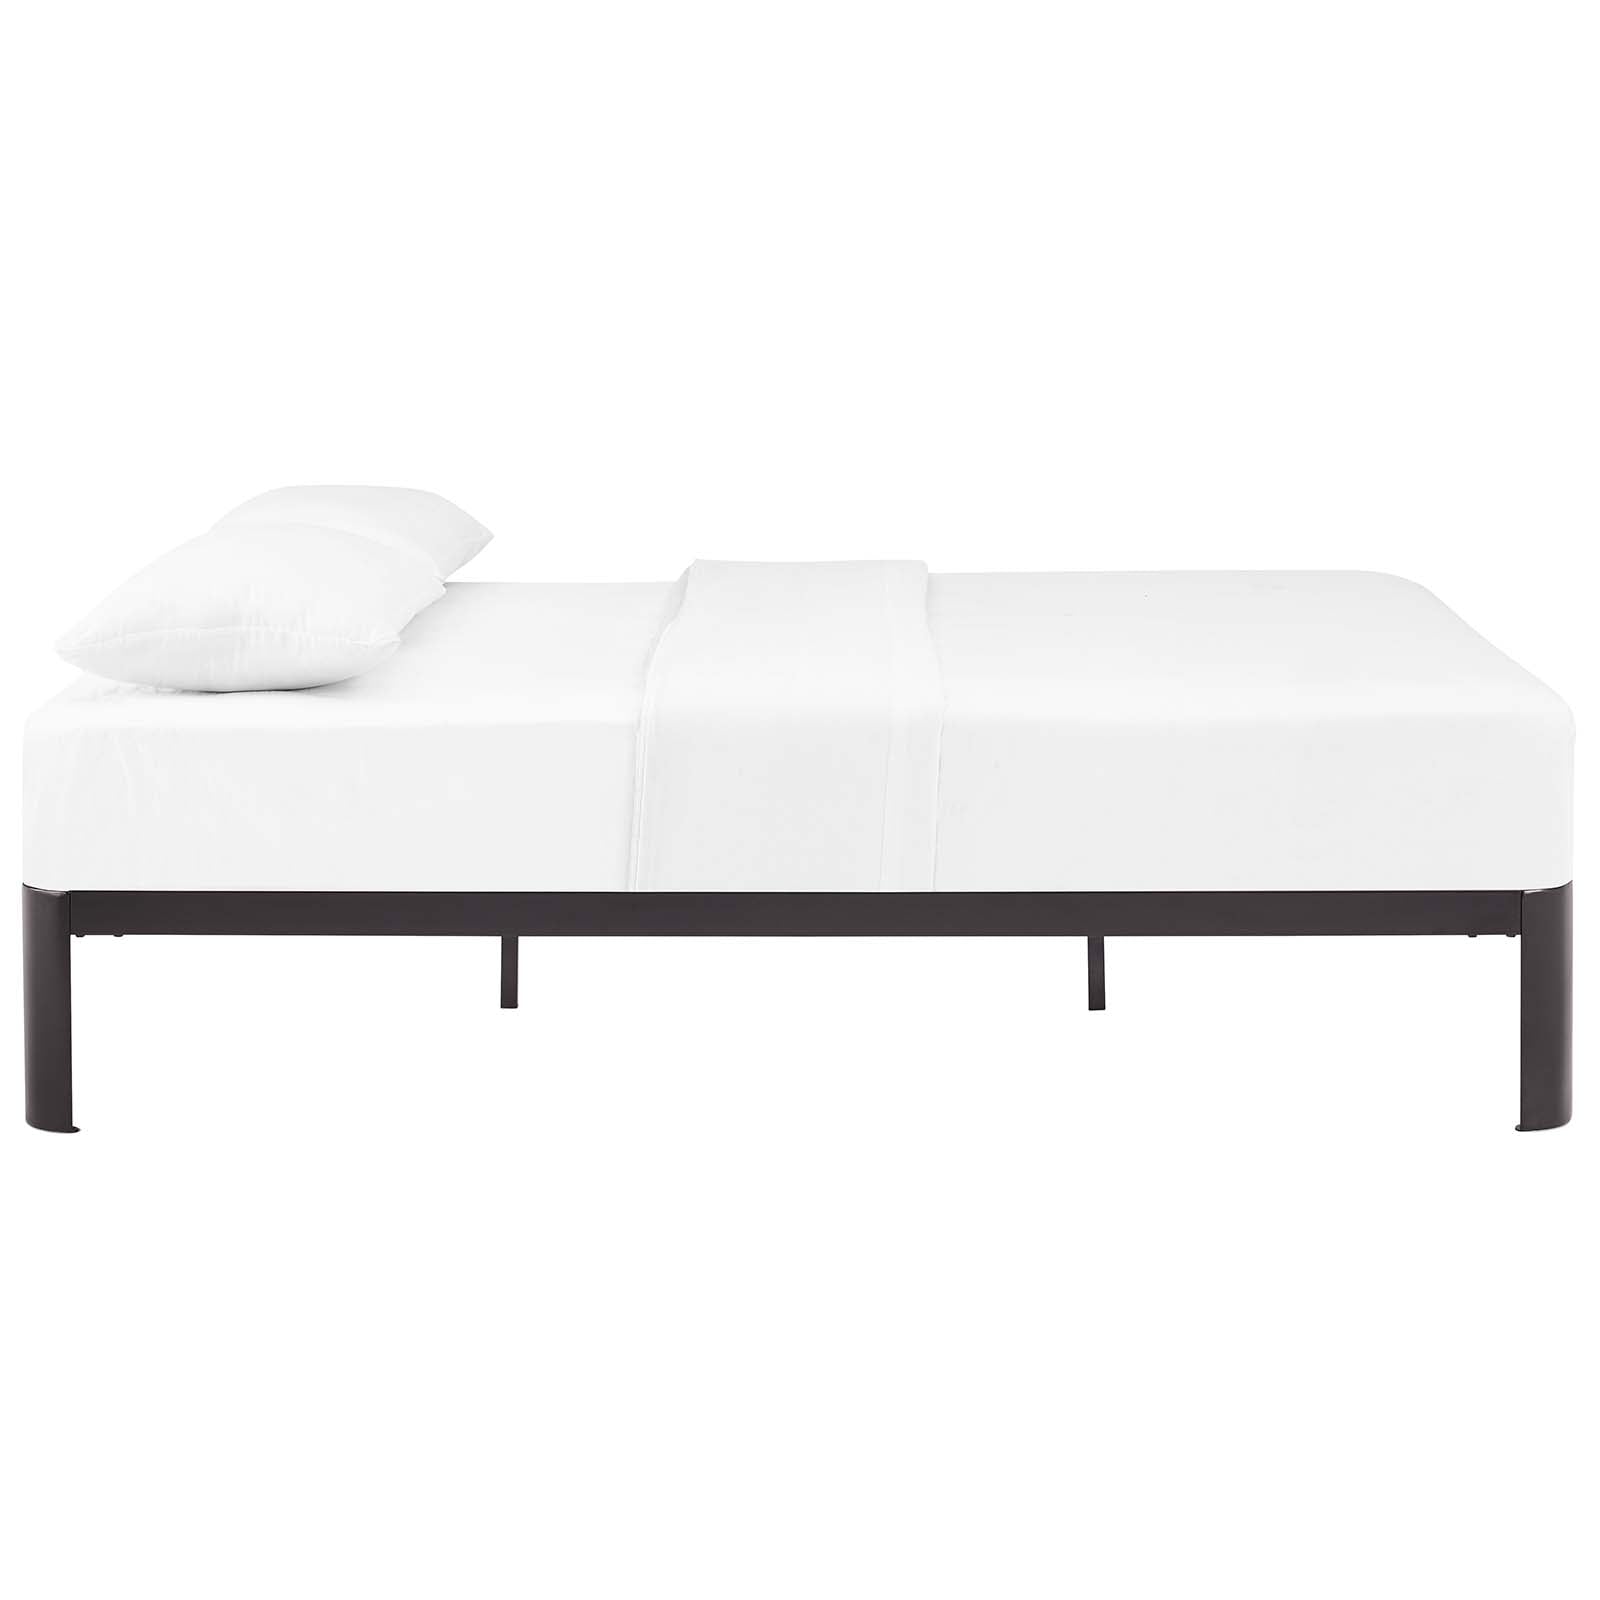 Modway Beds - Corinne Queen Bed Frame Brown